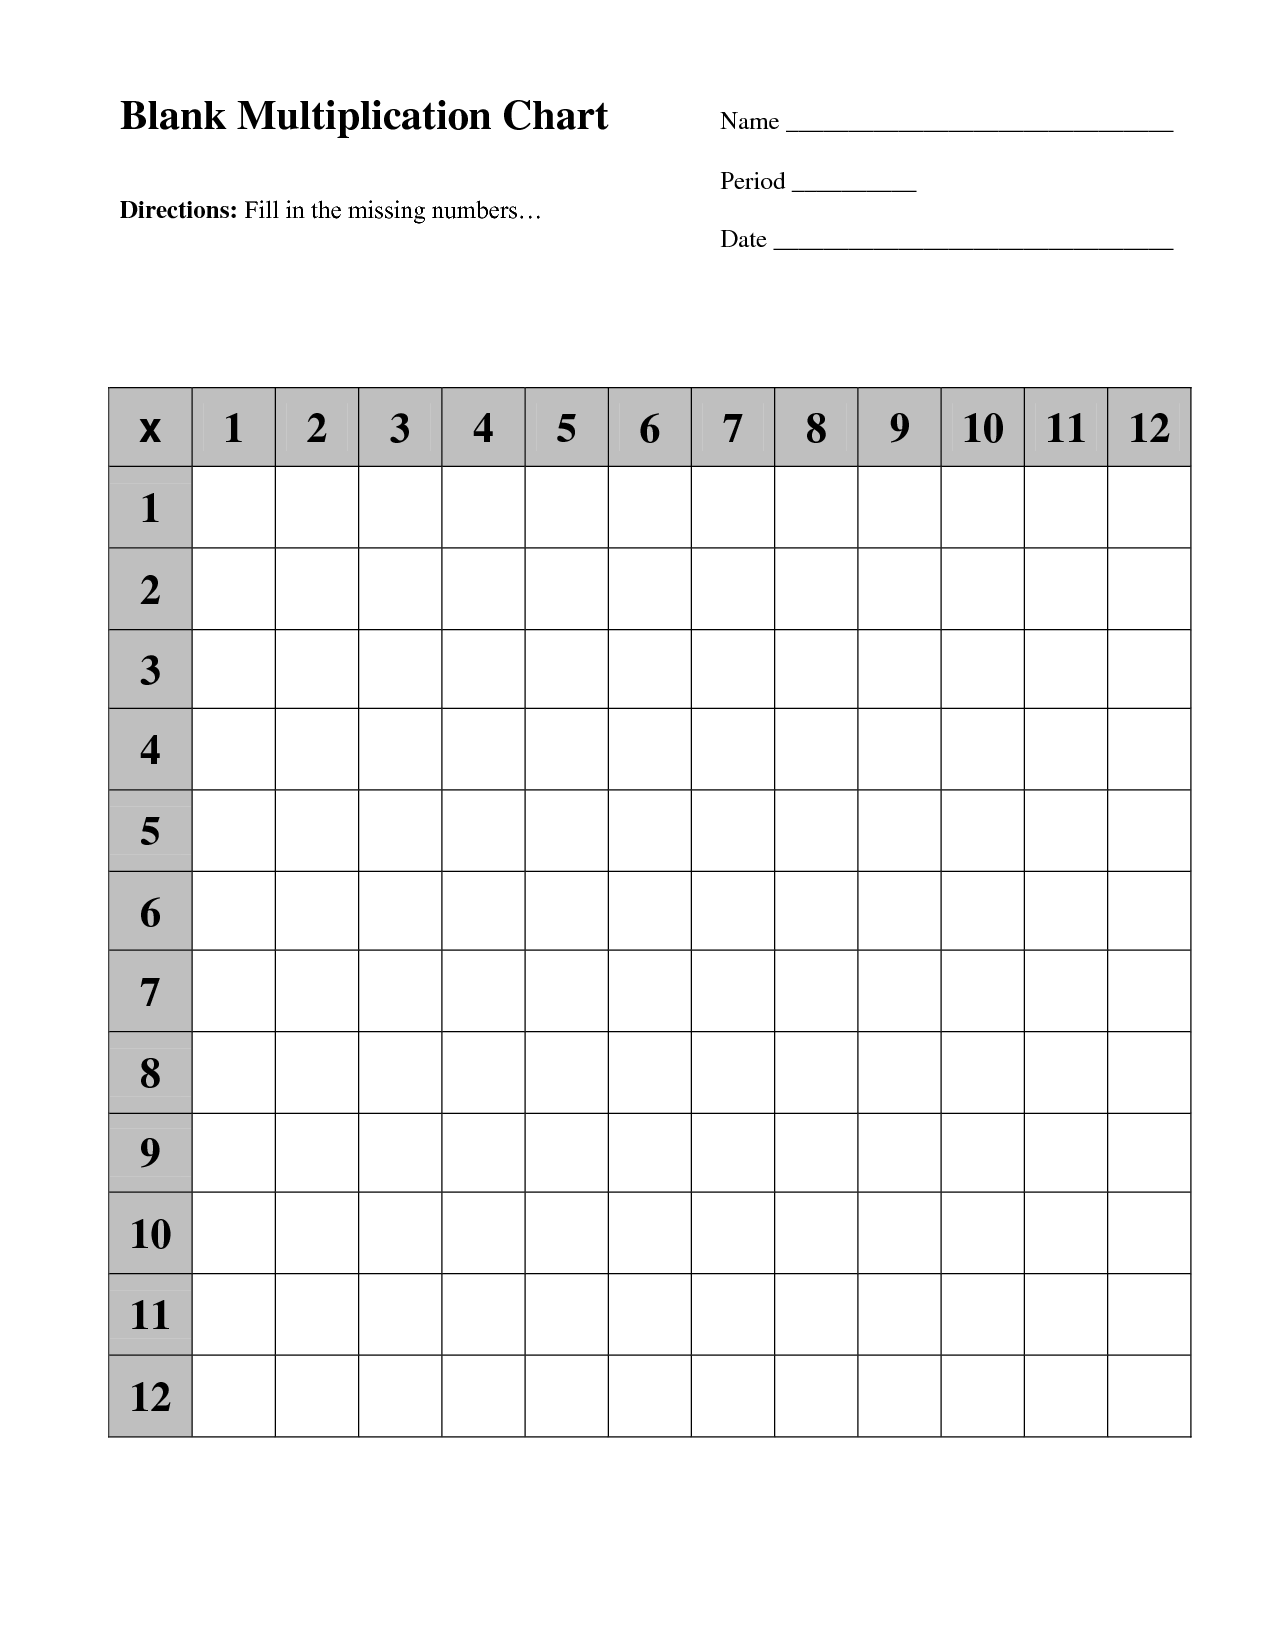 blank-multiplication-chart-printable-that-are-witty-hudson-website